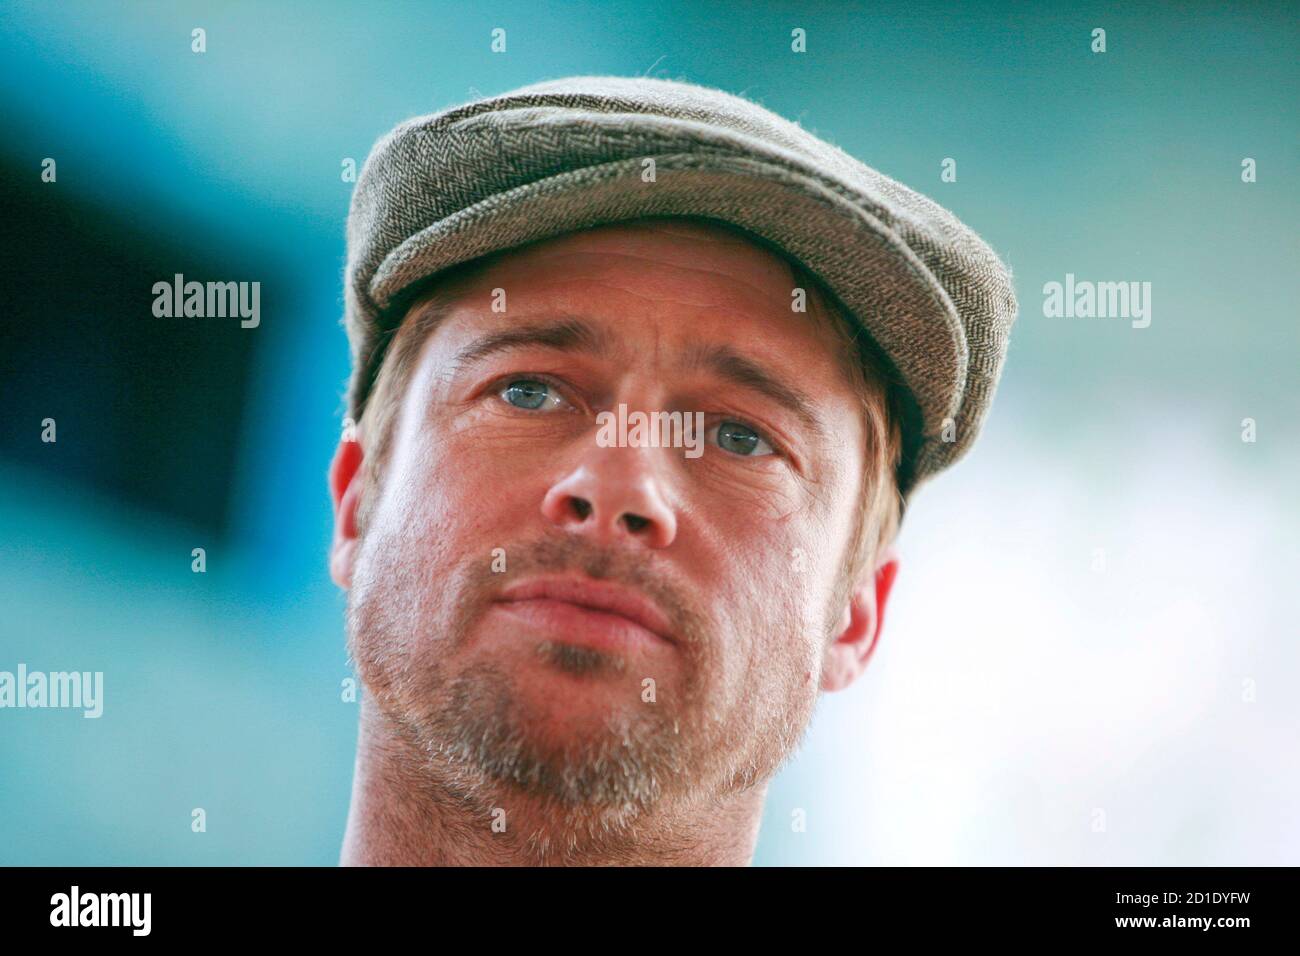 Actor Brad Pitt attends a milestone celebration for Global Green's sustainable, low-income home in the Lower Ninth Ward of New Orleans, Louisiana August 21, 2007.  REUTERS/Lee Celano (UNITED STATES) Stock Photo